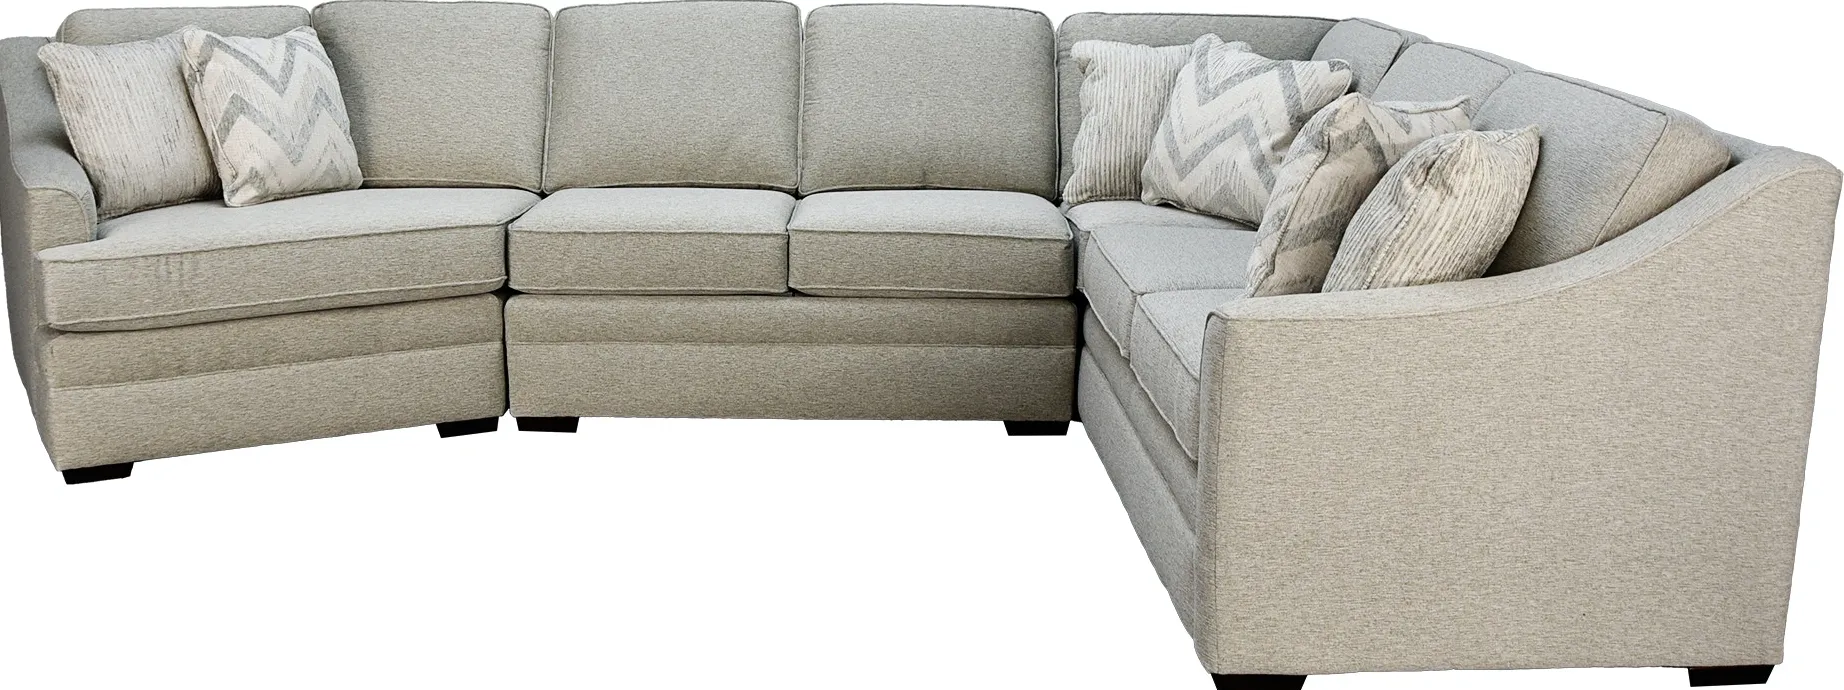 Tennessee Custom THOMAS 3 PC SECTIONAL